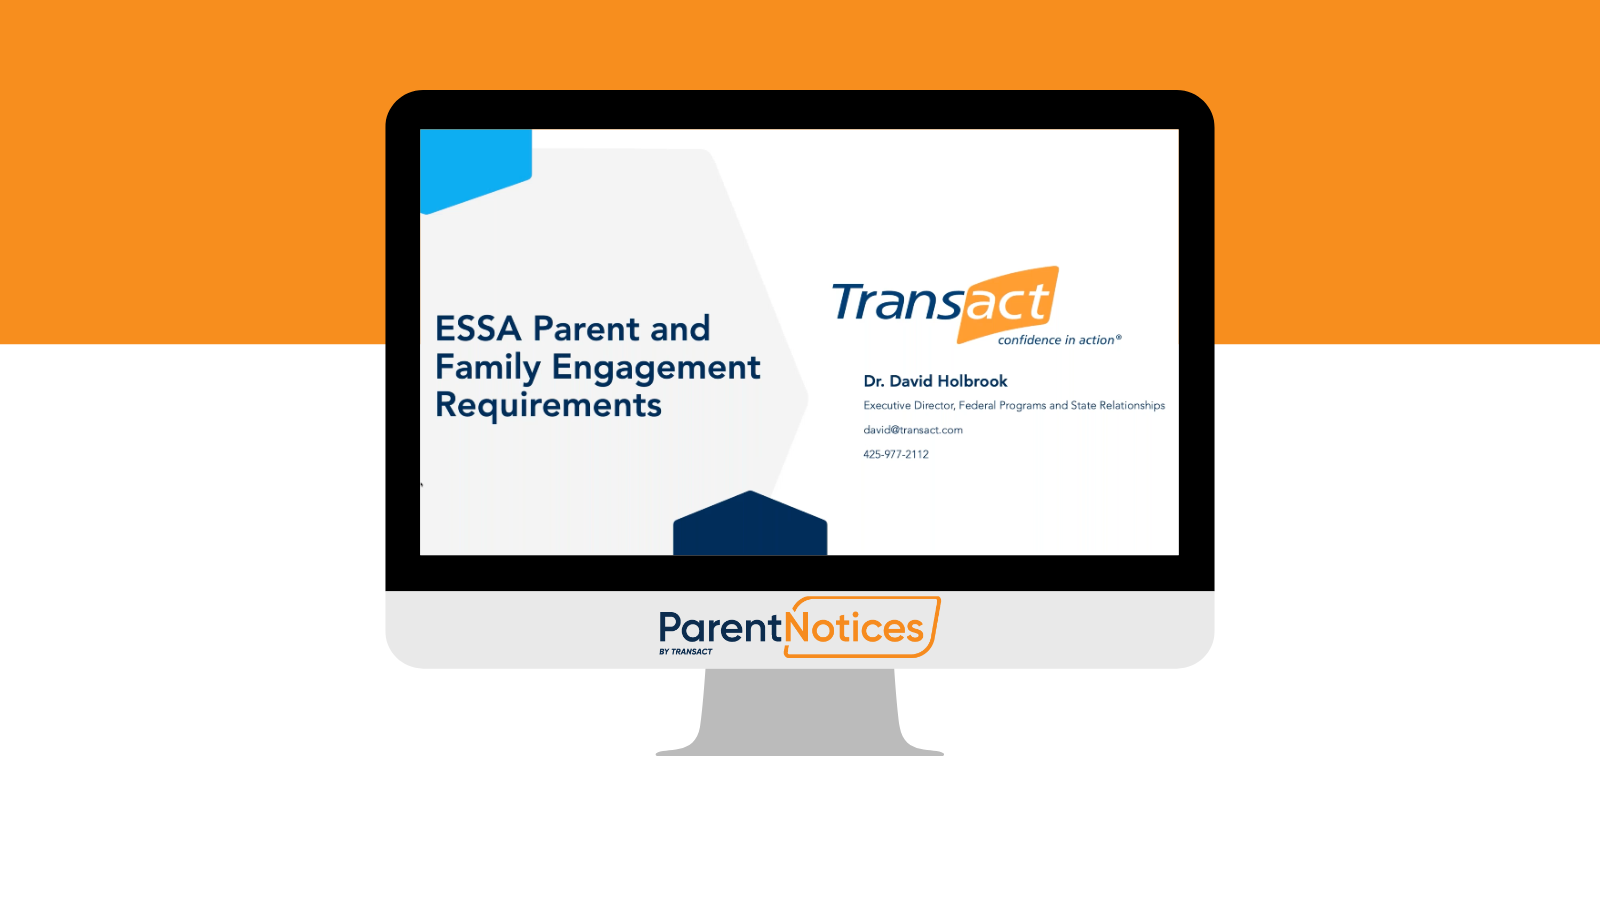 Increases in Federal Requirements for Parent and Family Engagement